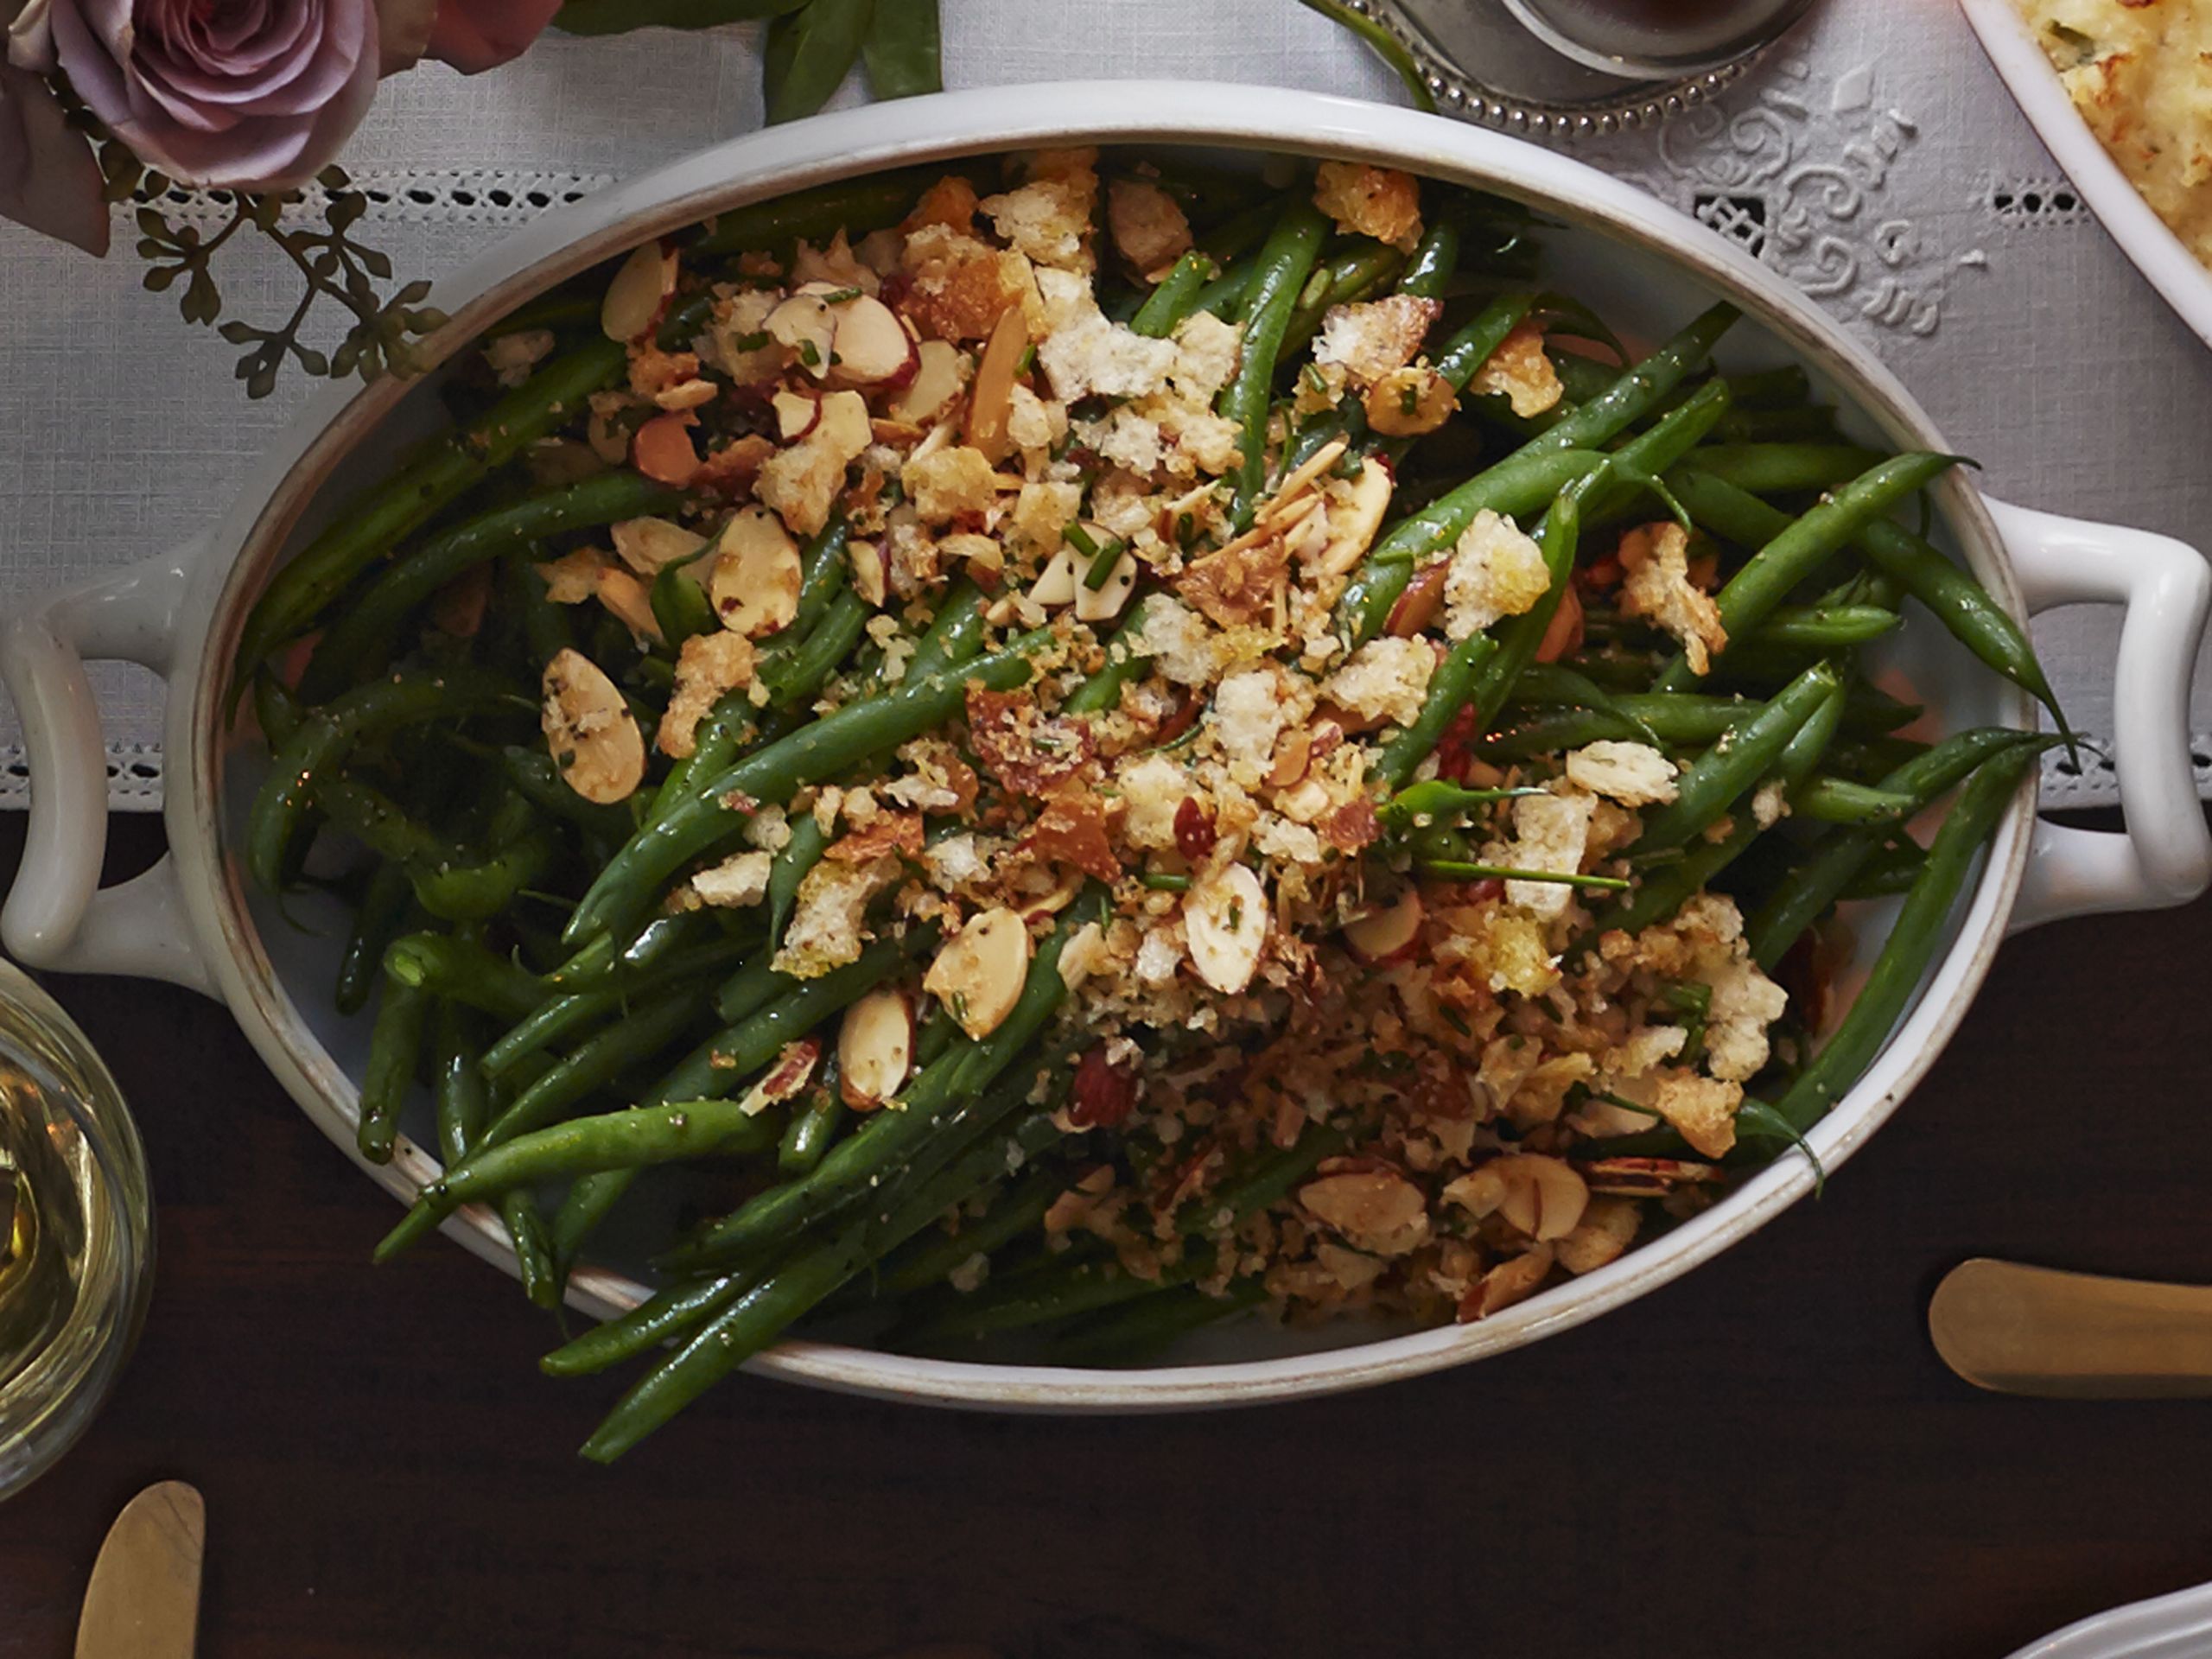 Best Green Bean Recipe For Thanksgiving
 French Green Beans with Garlicky Almond Breadcrumbs Recipe